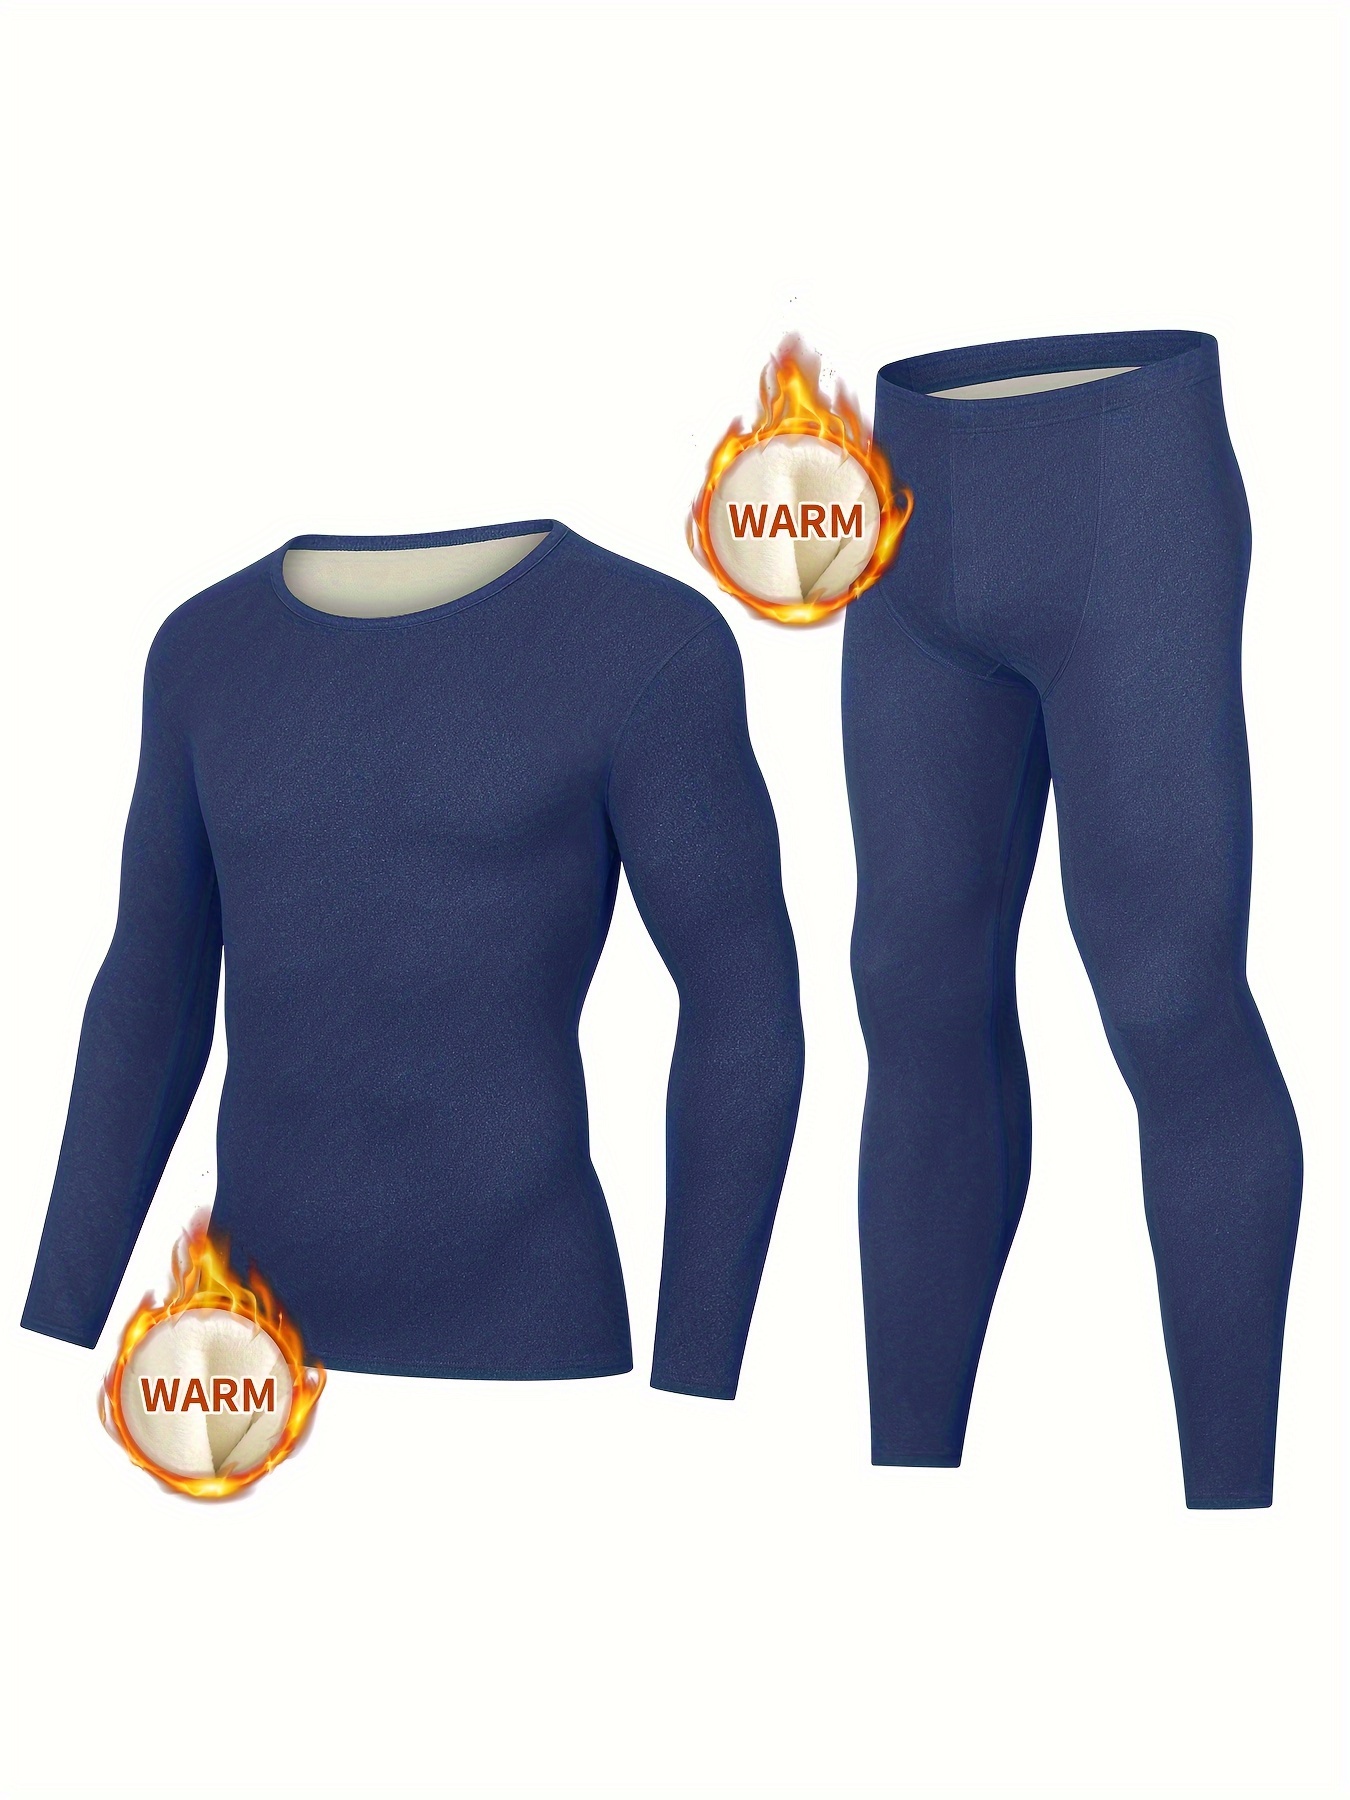 Men's Thermal Underwear  The Base Layer in Cold Weather Dressing